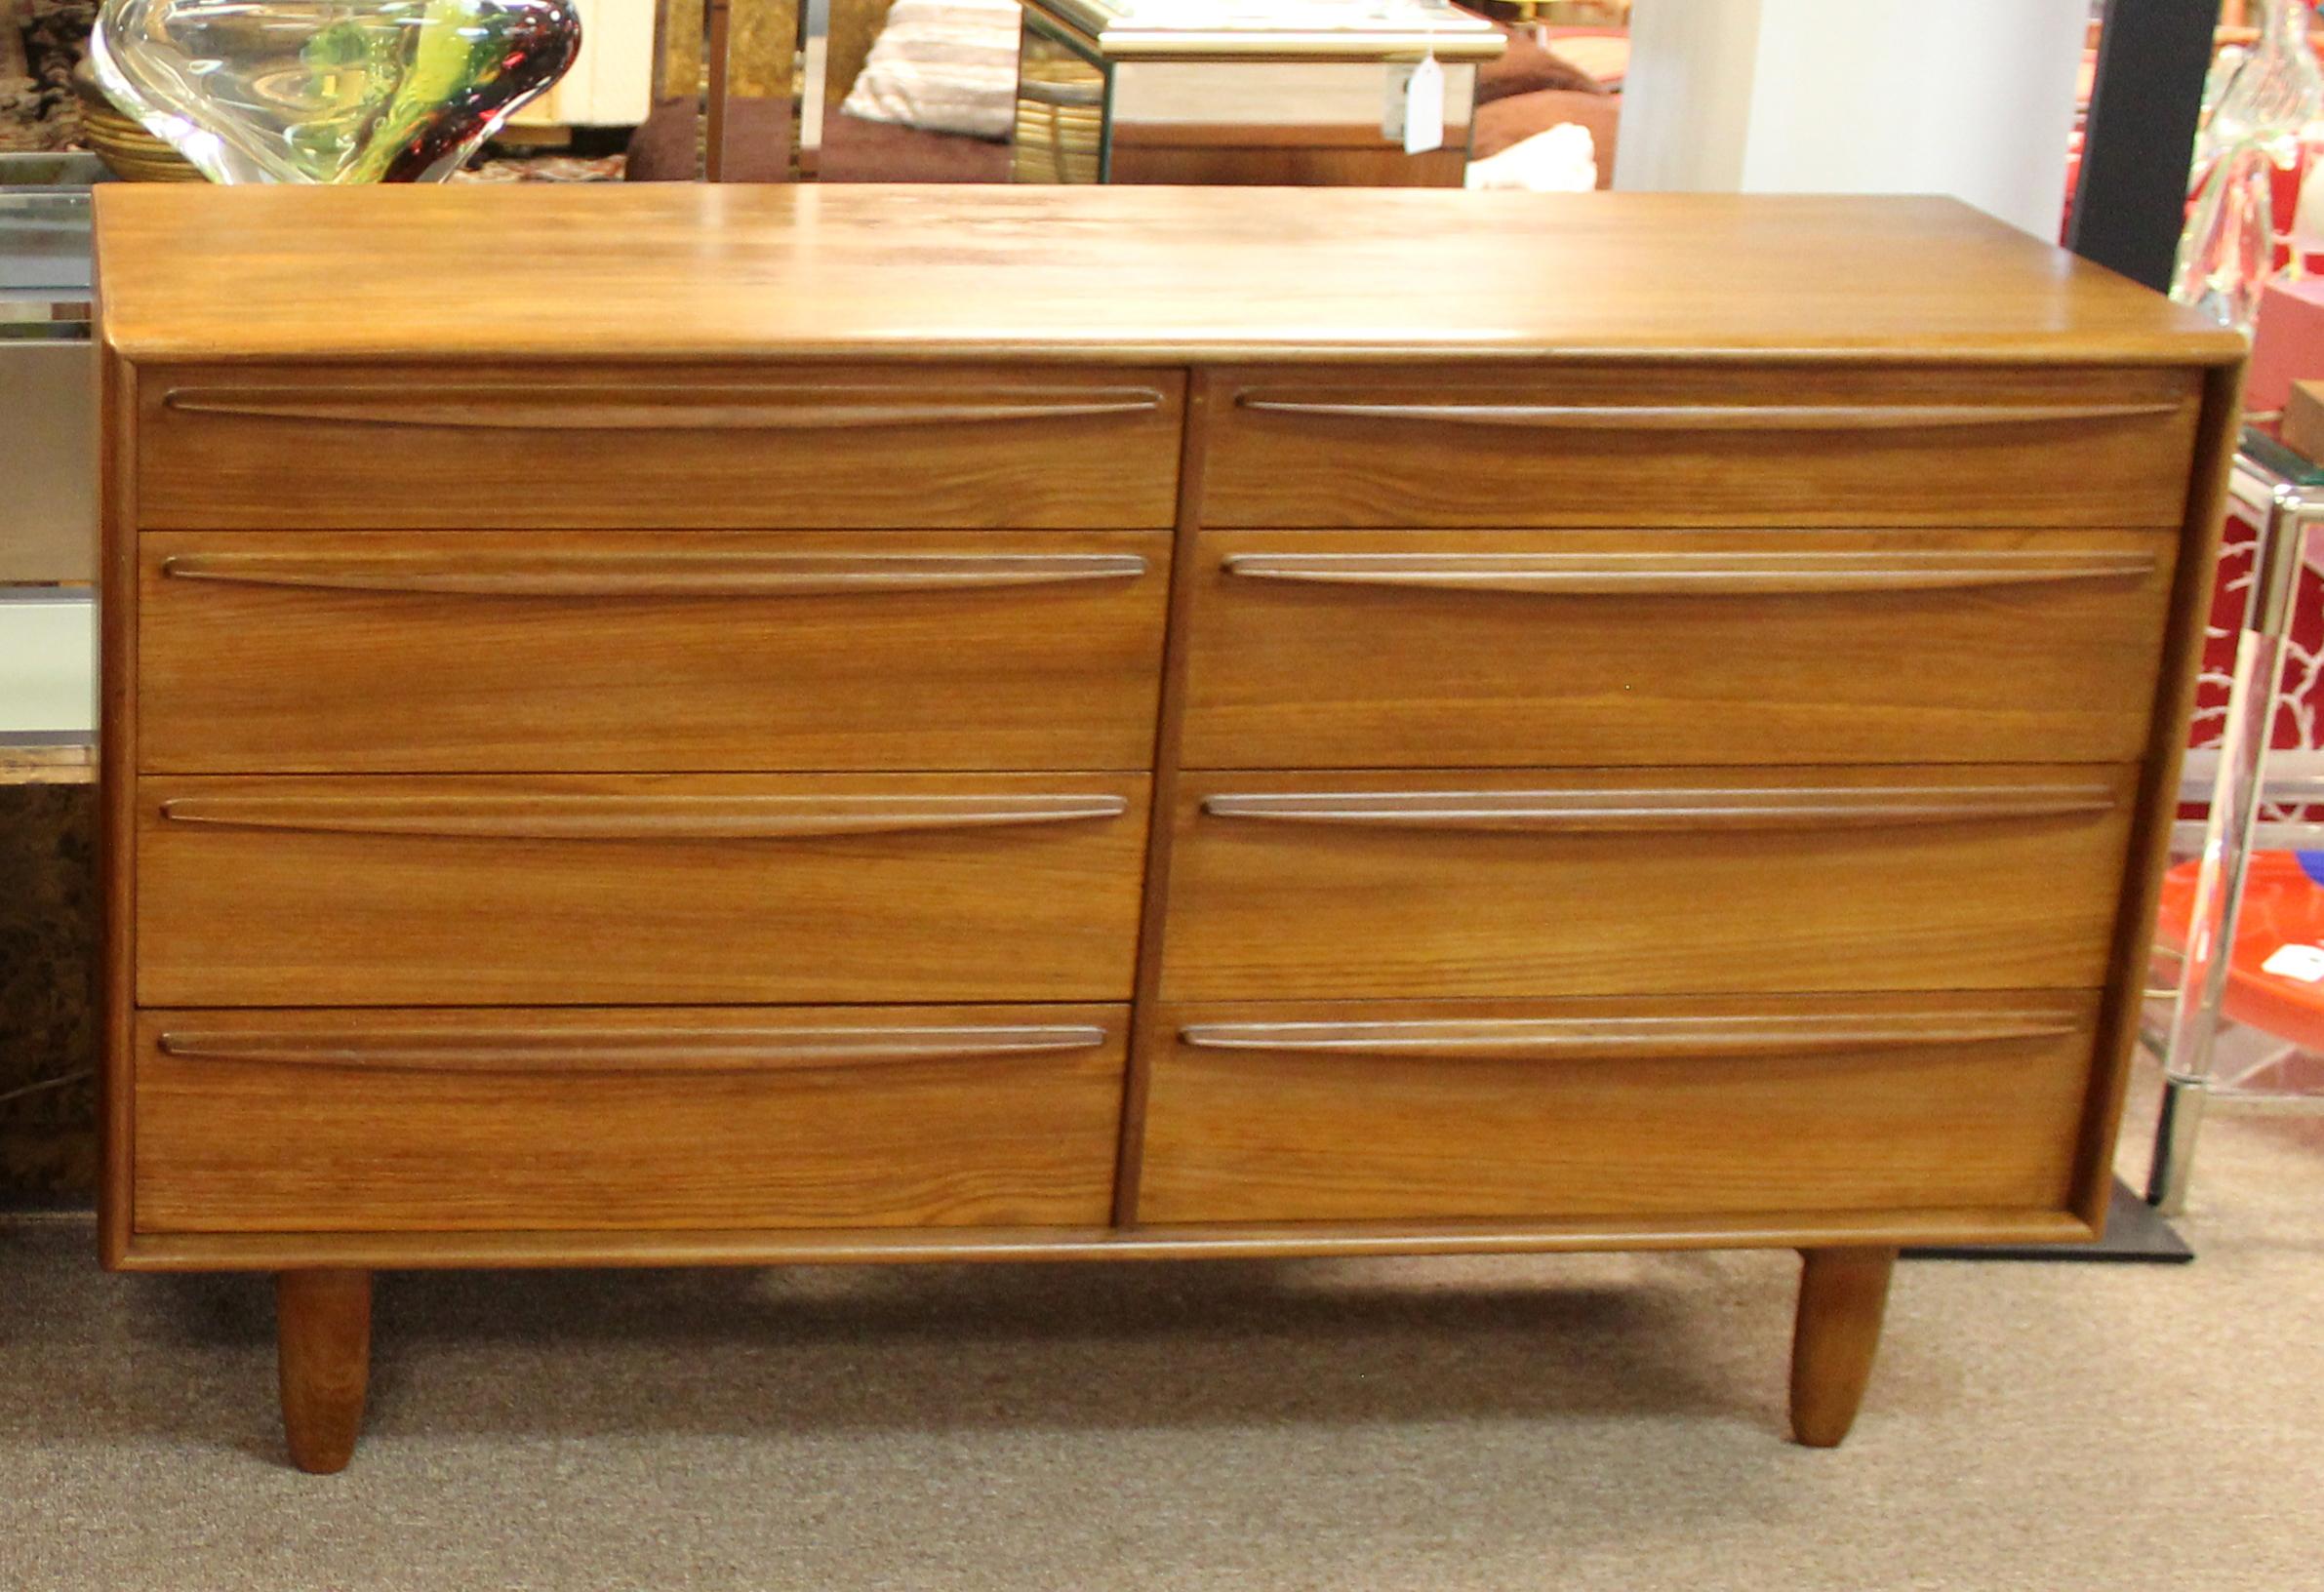 For your consideration is a stunning, teak dresser, with eight drawers, made in Denmark, by Svend Aage Madsen, circa 1960s. In excellent vintage condition. The dimensions are 54